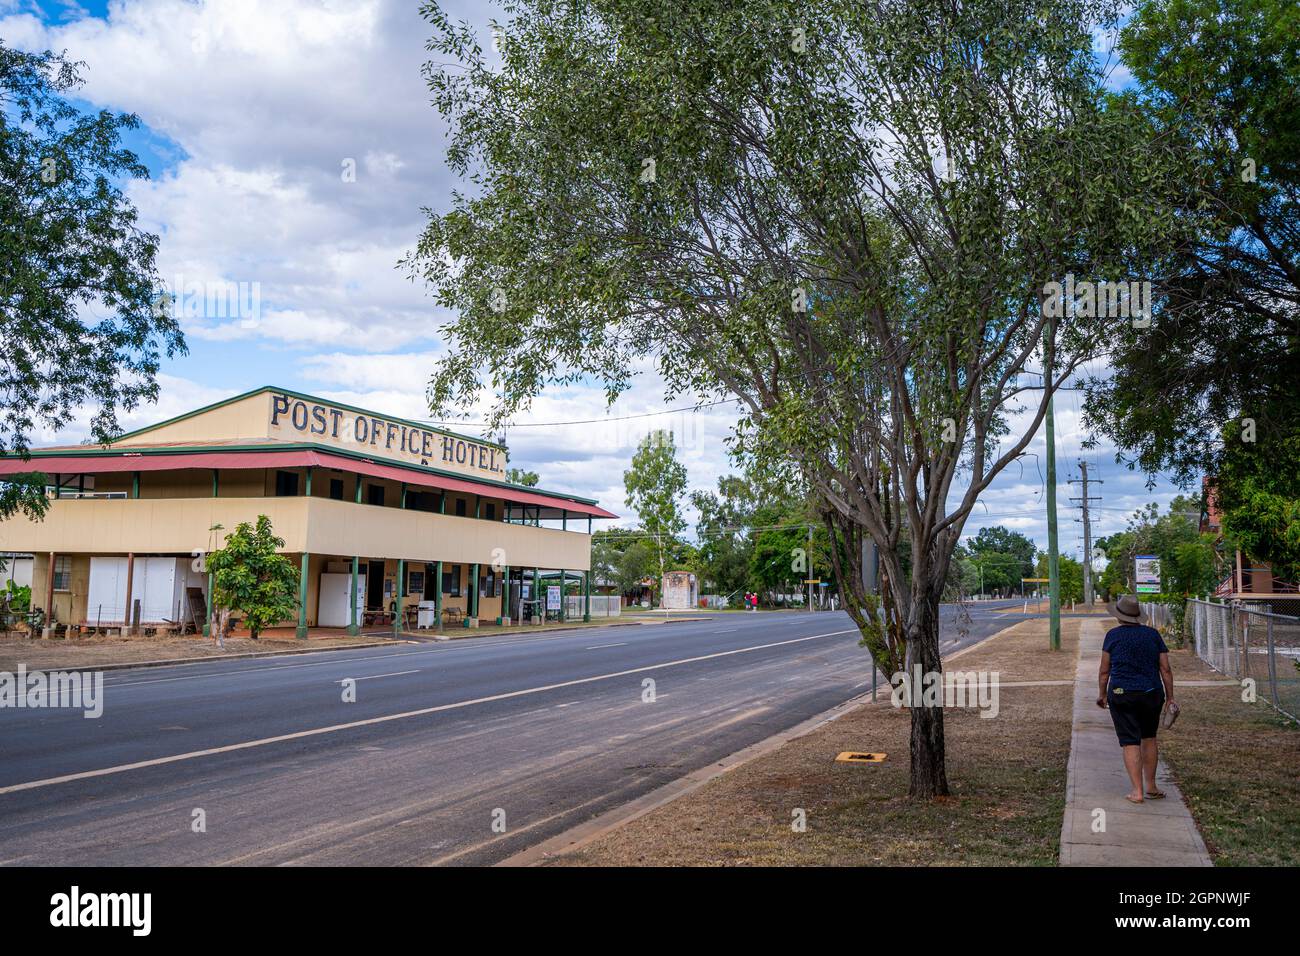 Post Office hotel in small rural town of Chillagoe, North Queensland, Australia Stock Photo